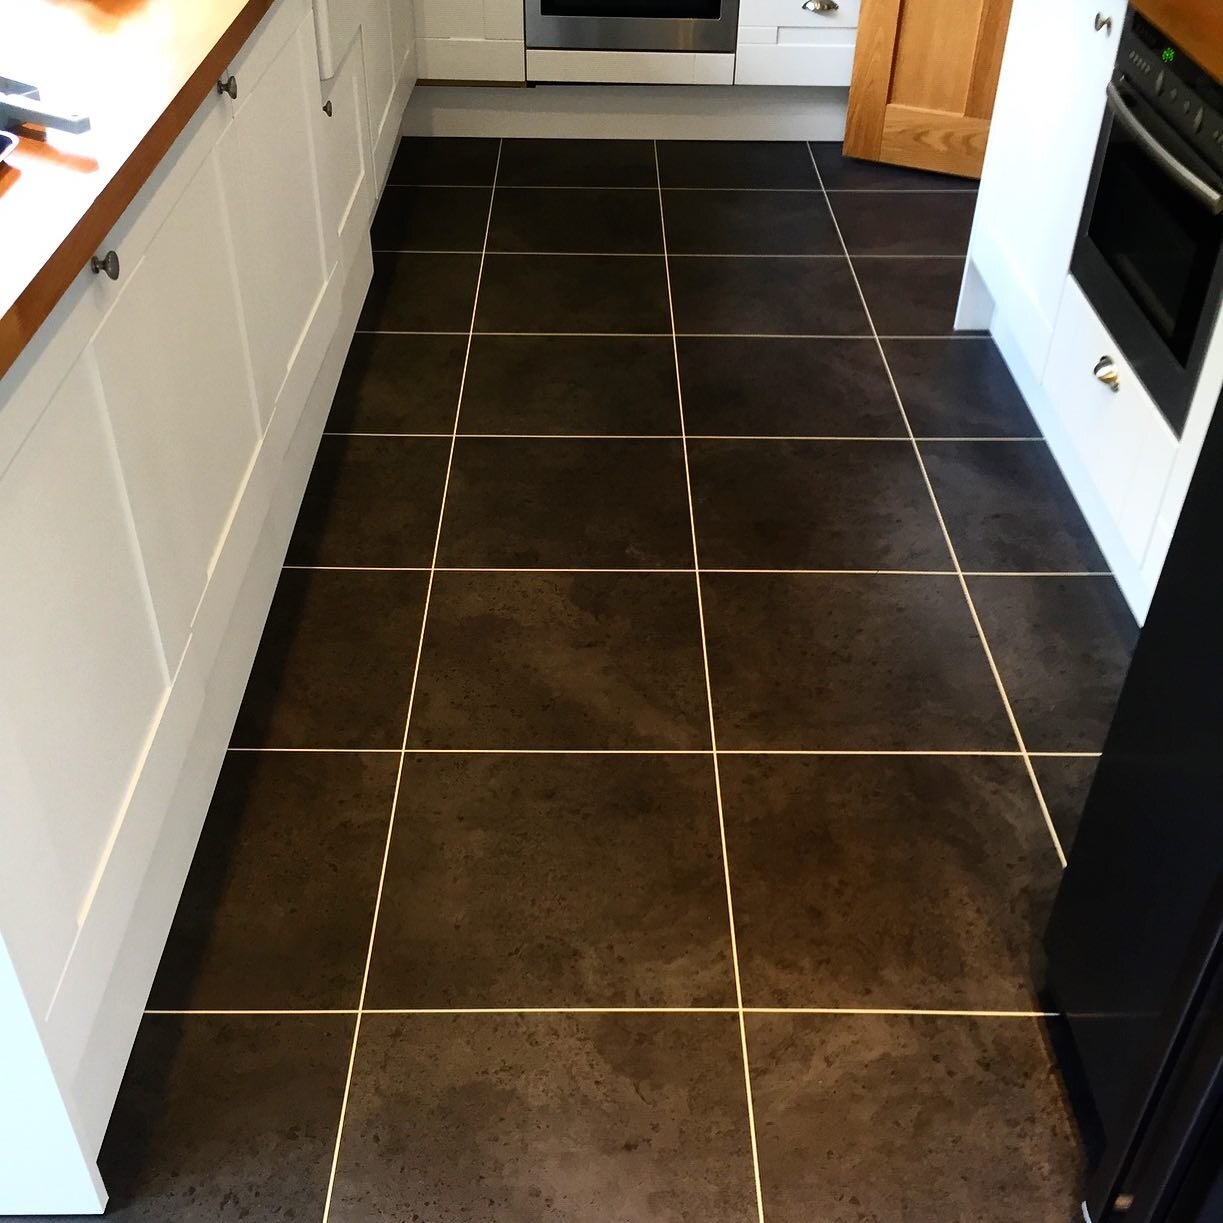 Your kitchen needs a makeover? We can help you redesign from guiding you through your decor options, to retiling the walls &amp; floor to reinstalling heavy appliances. Interested? Contact us today on 01923 286777